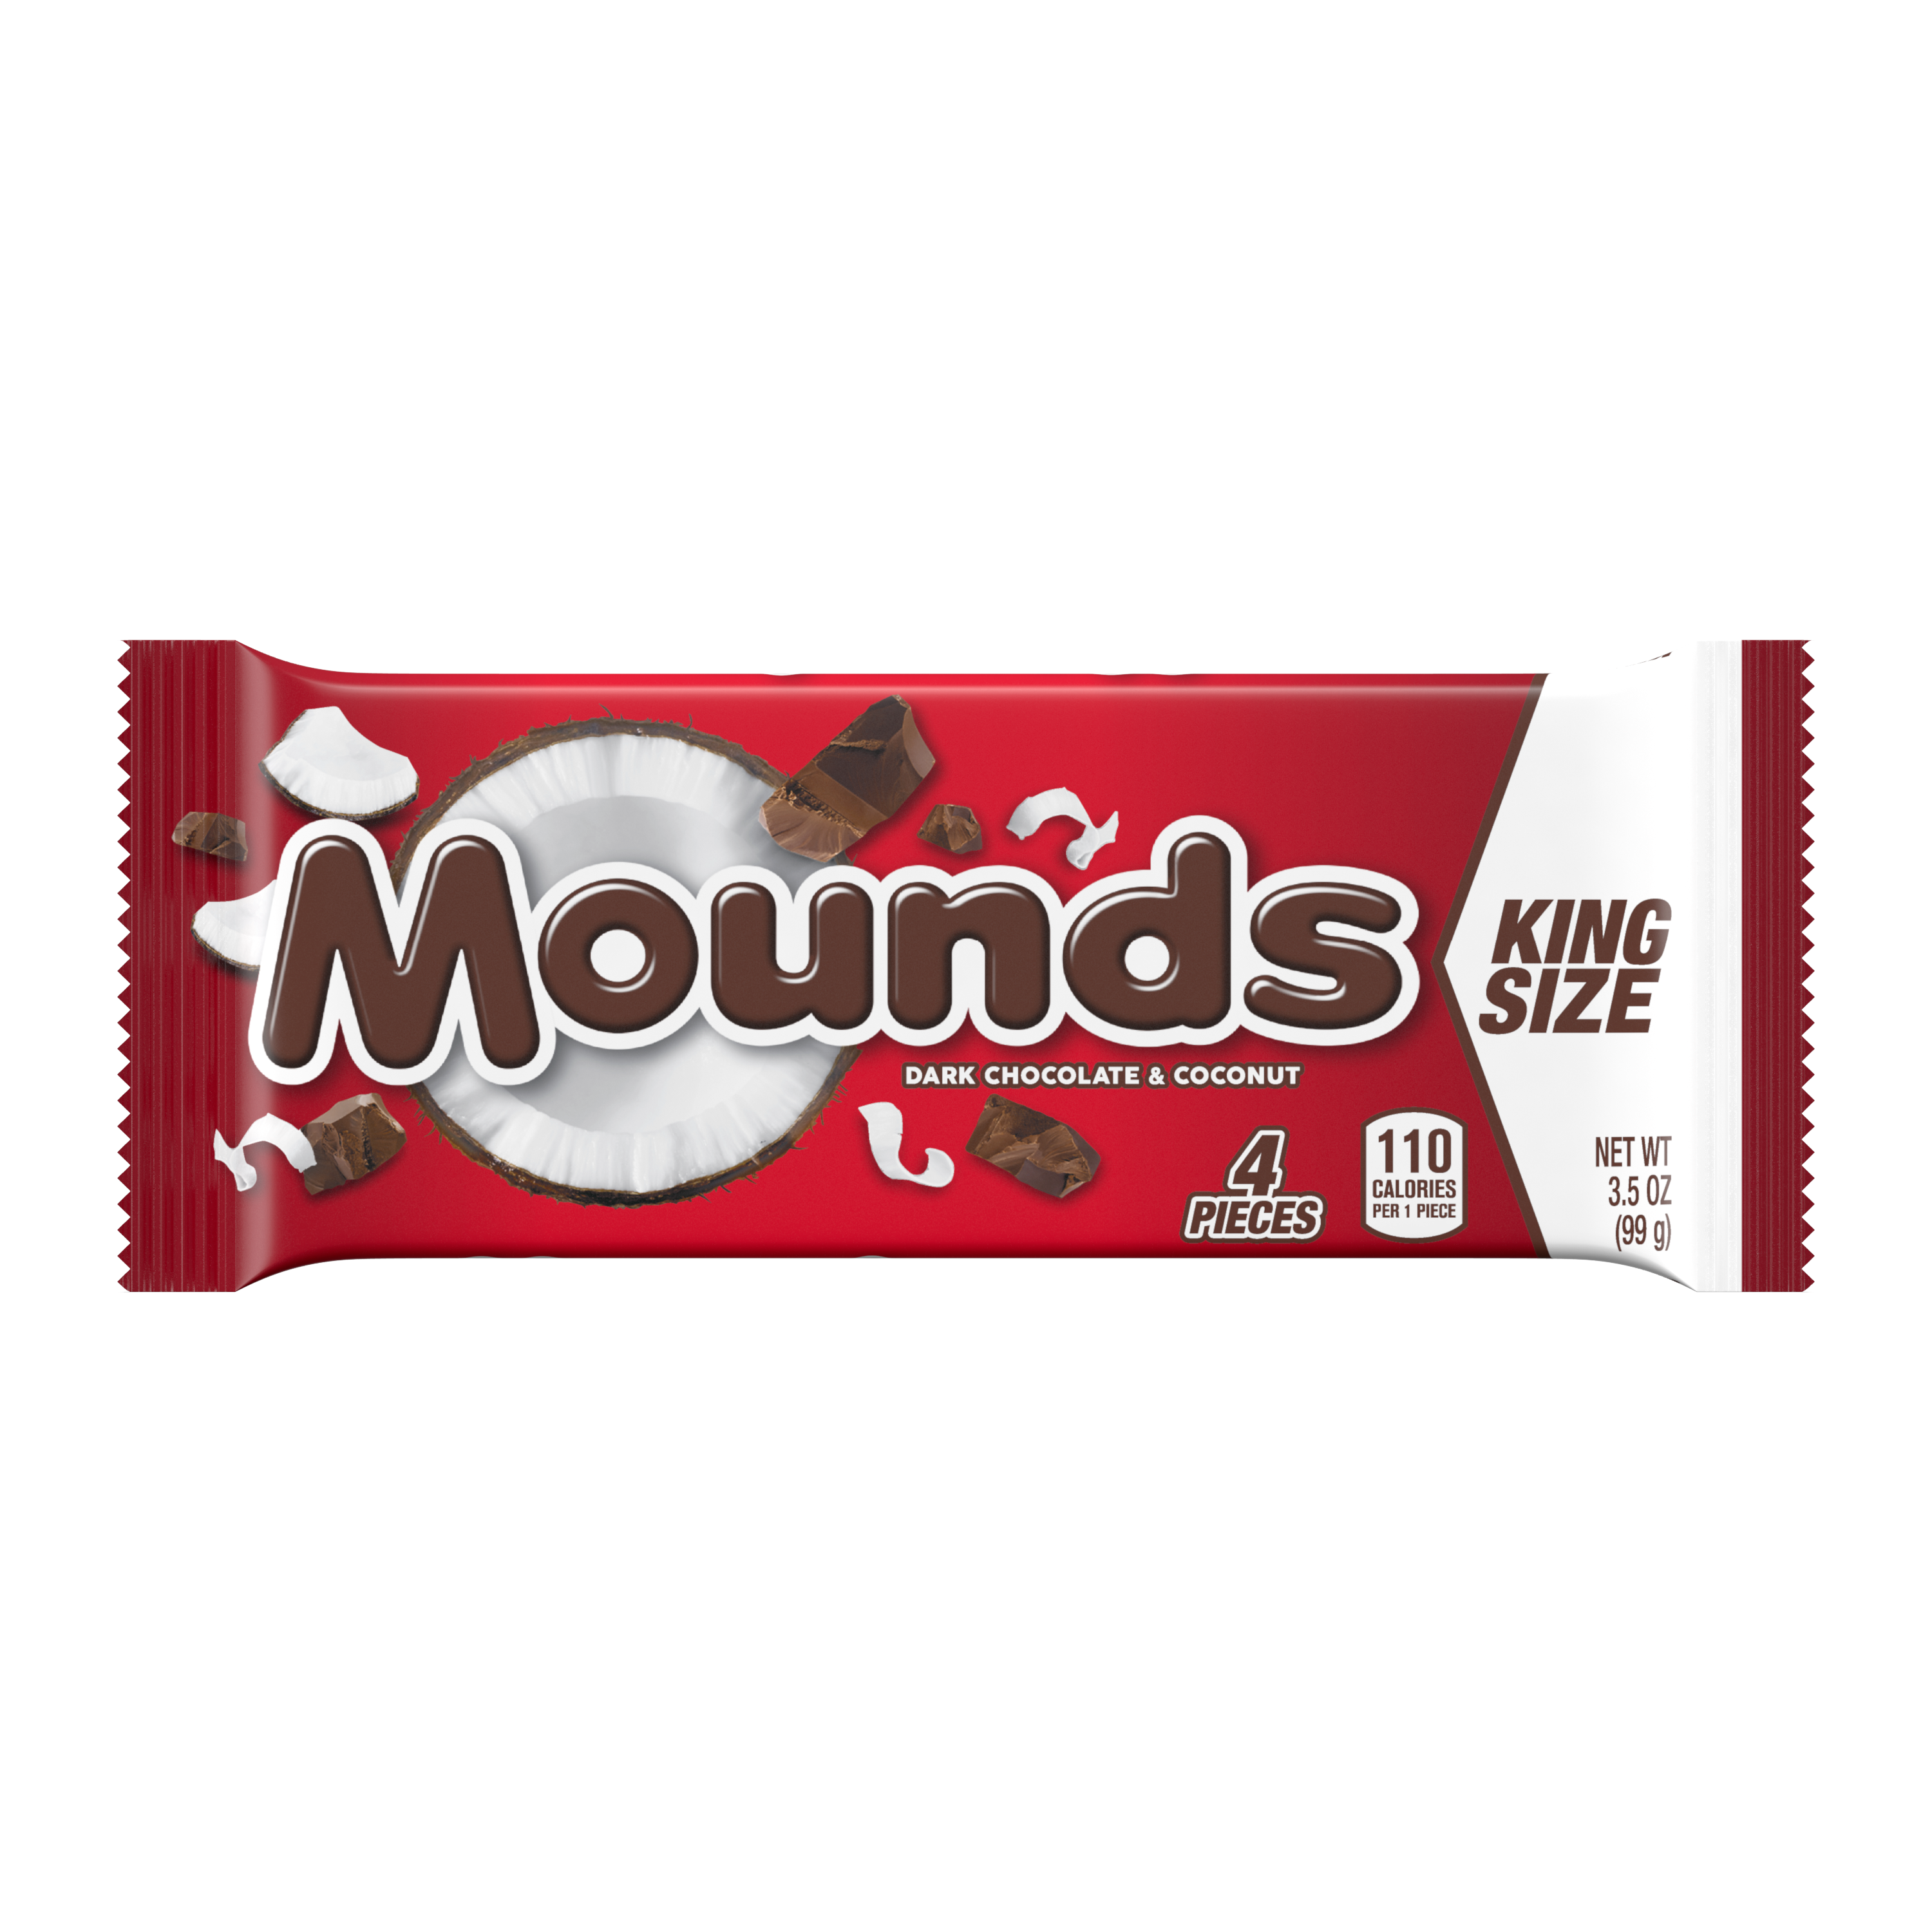 MOUNDS Dark Chocolate and Coconut King Size Candy Bar, 3.5 oz, 4 pieces - Front of Package